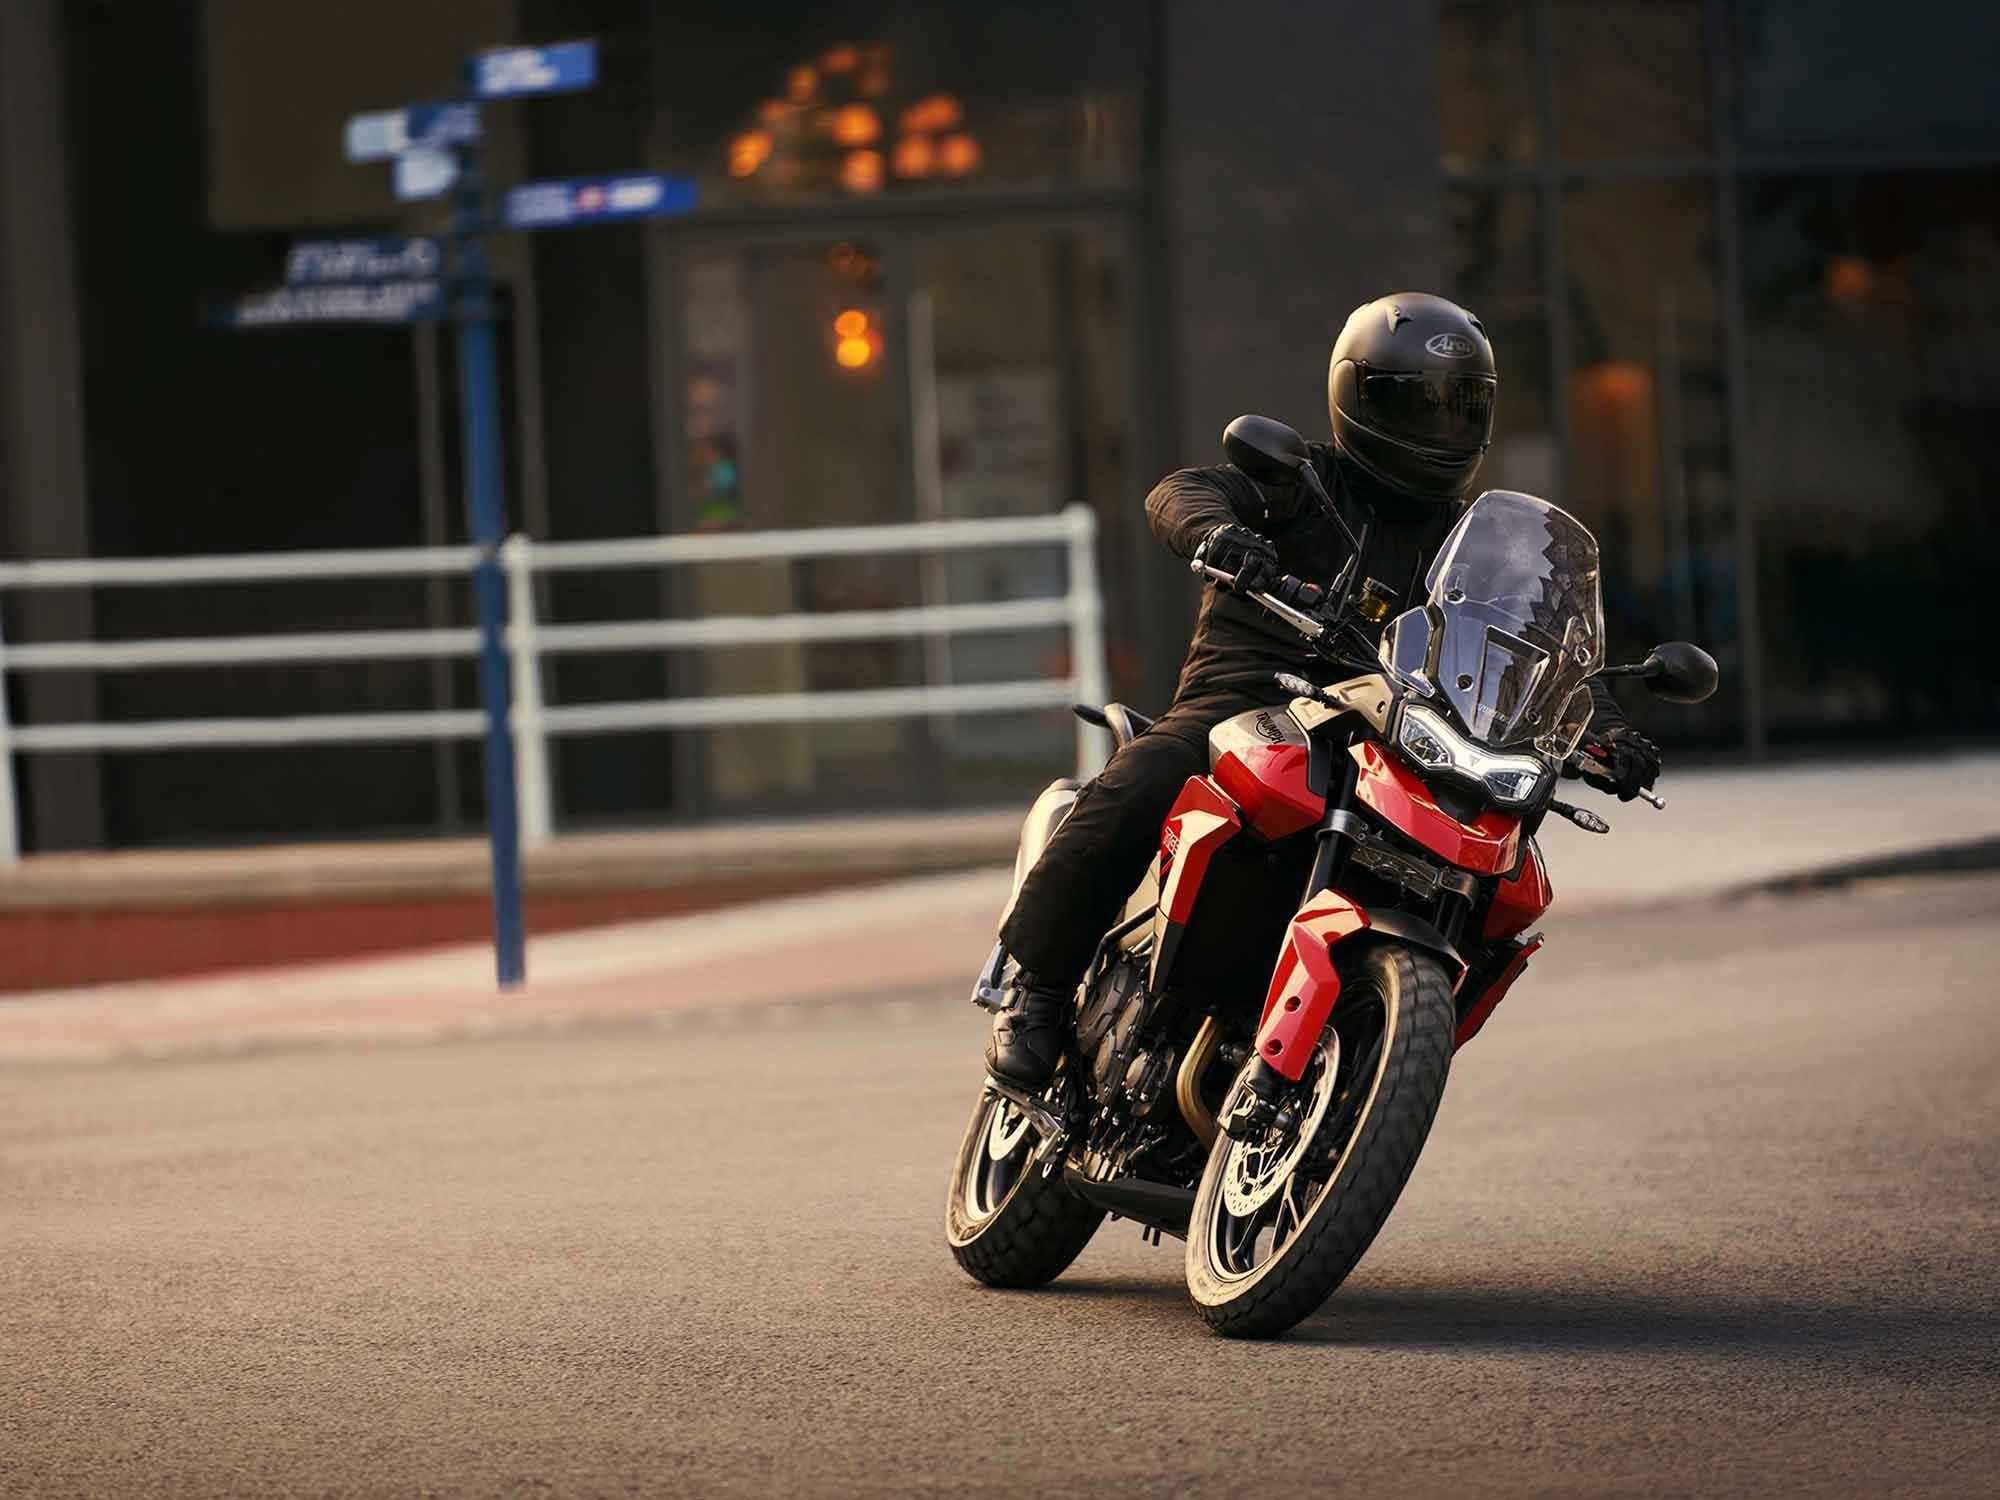 With cast wheels, the 850 Sport, like the GT models, is aimed at street riding.